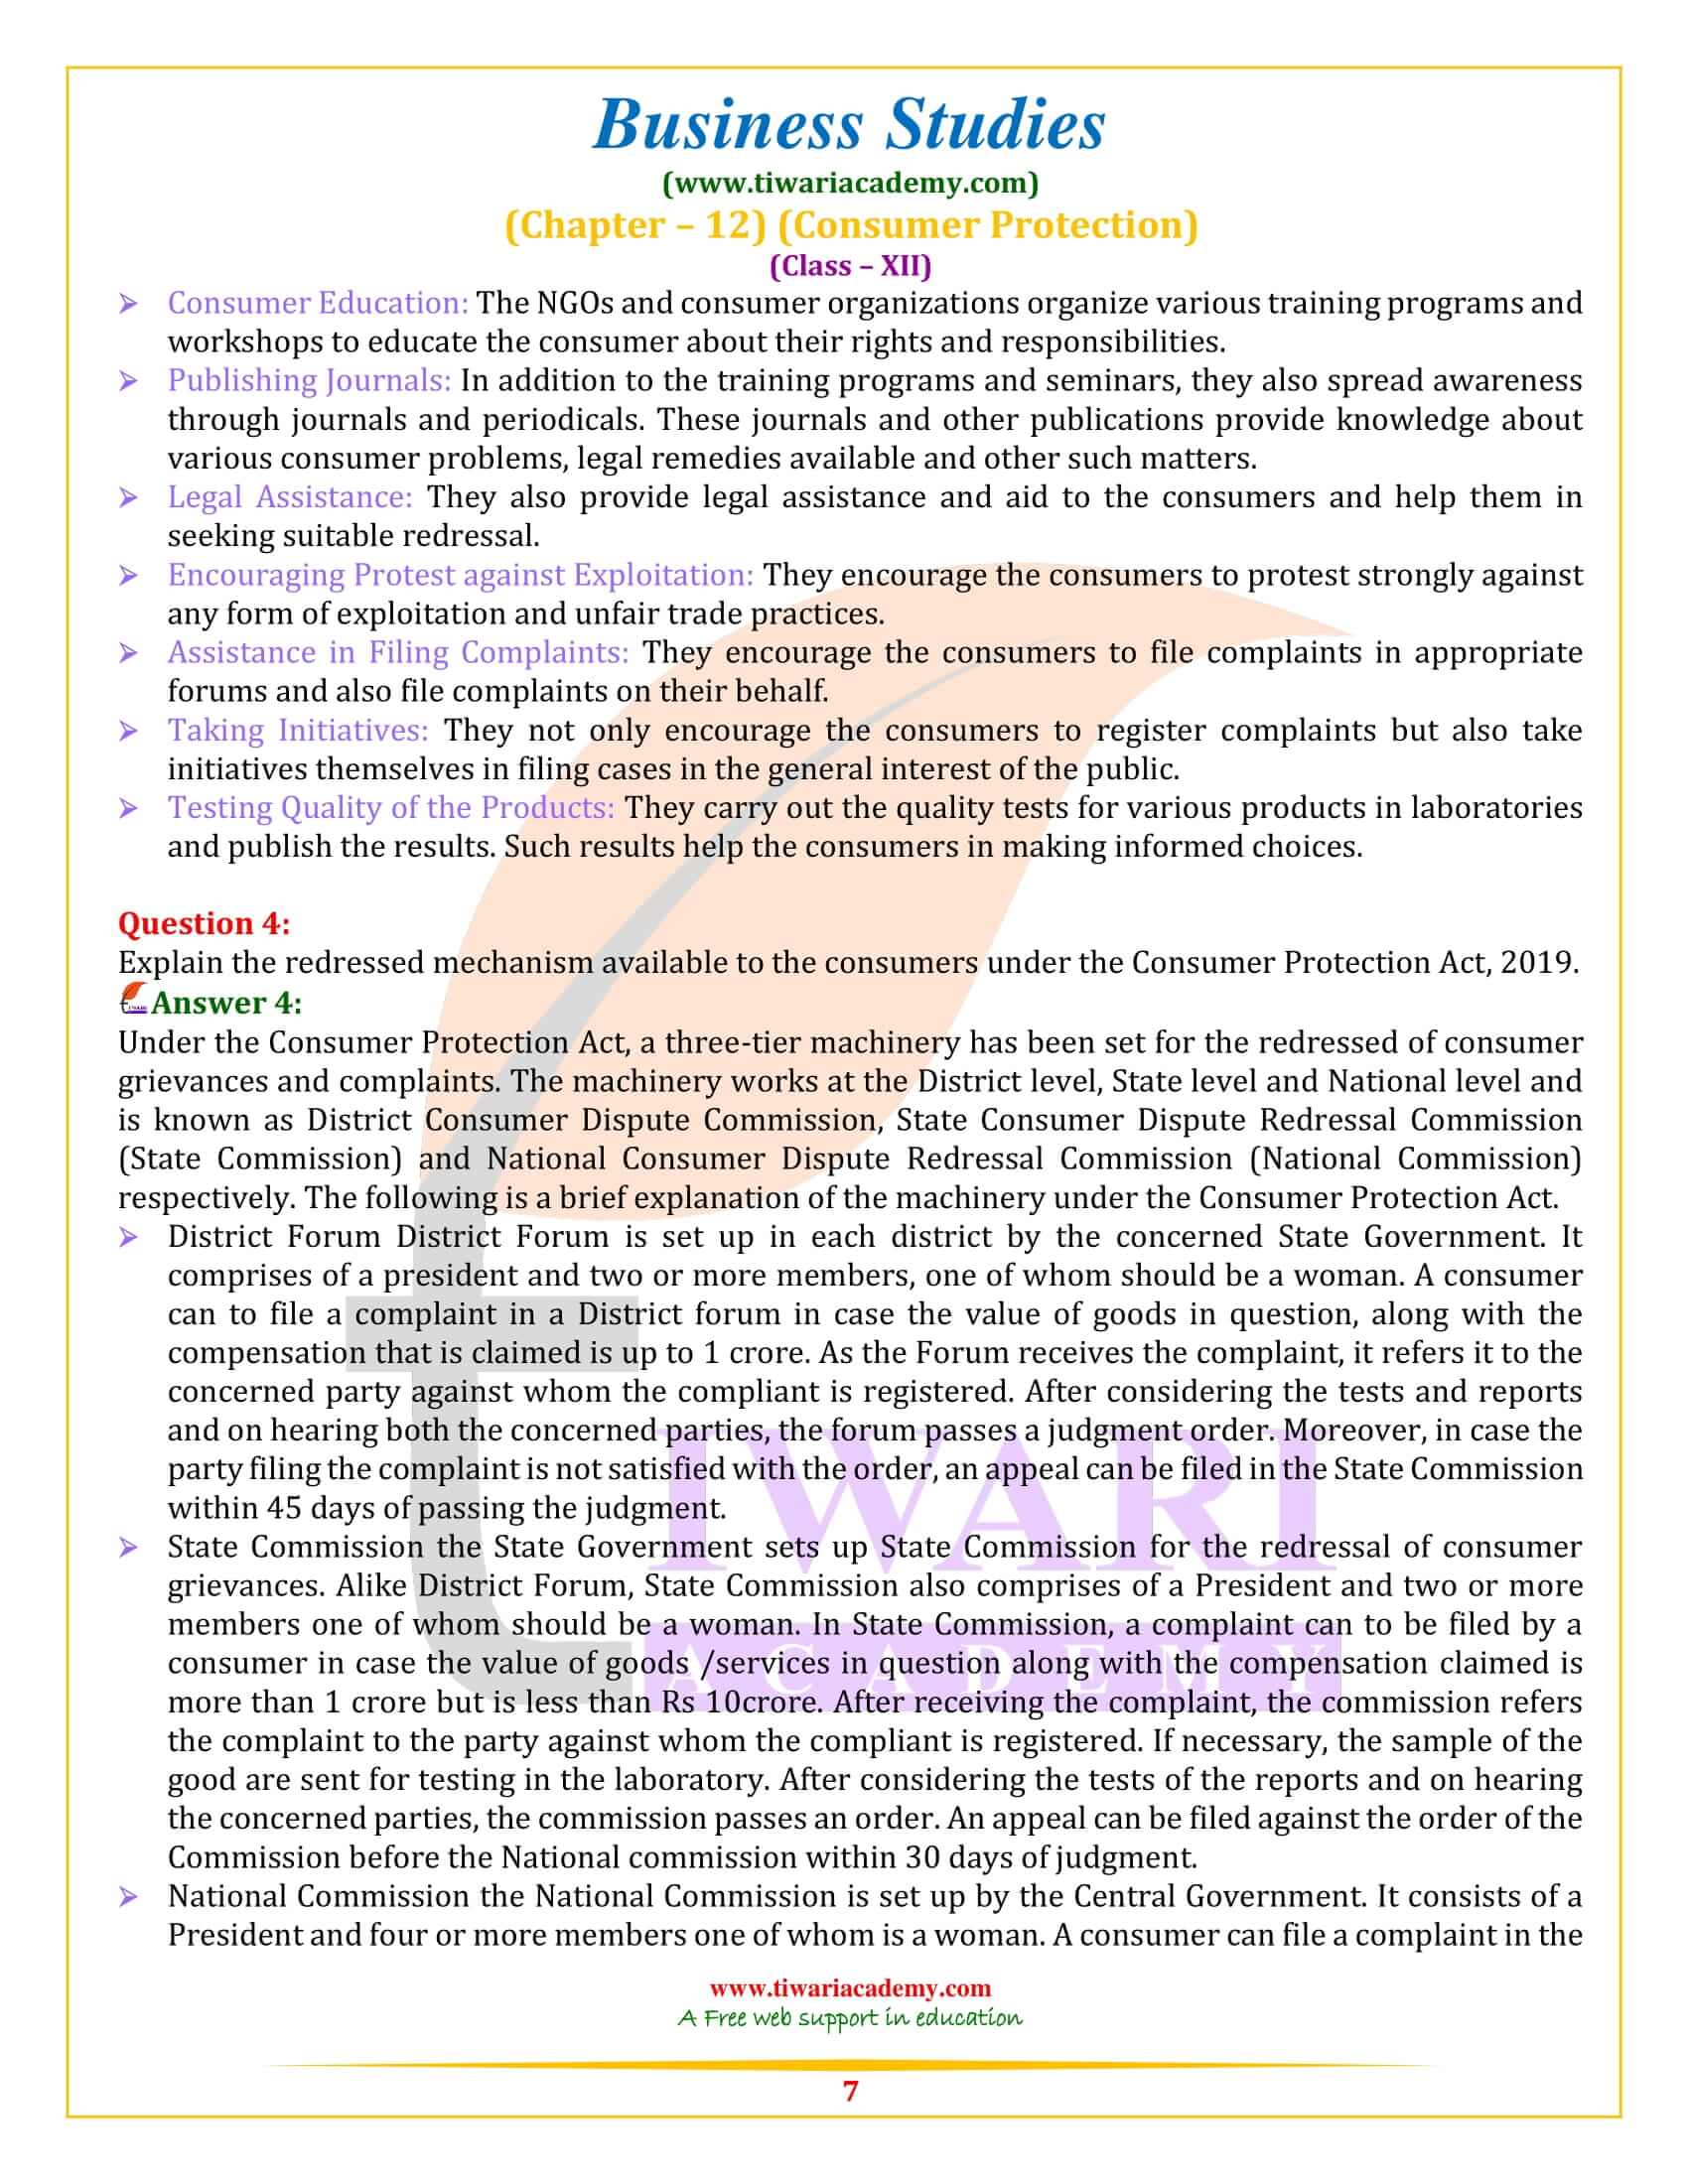 NCERT Solutions for Class 12 Business Studies Chapter 12 in English Medium